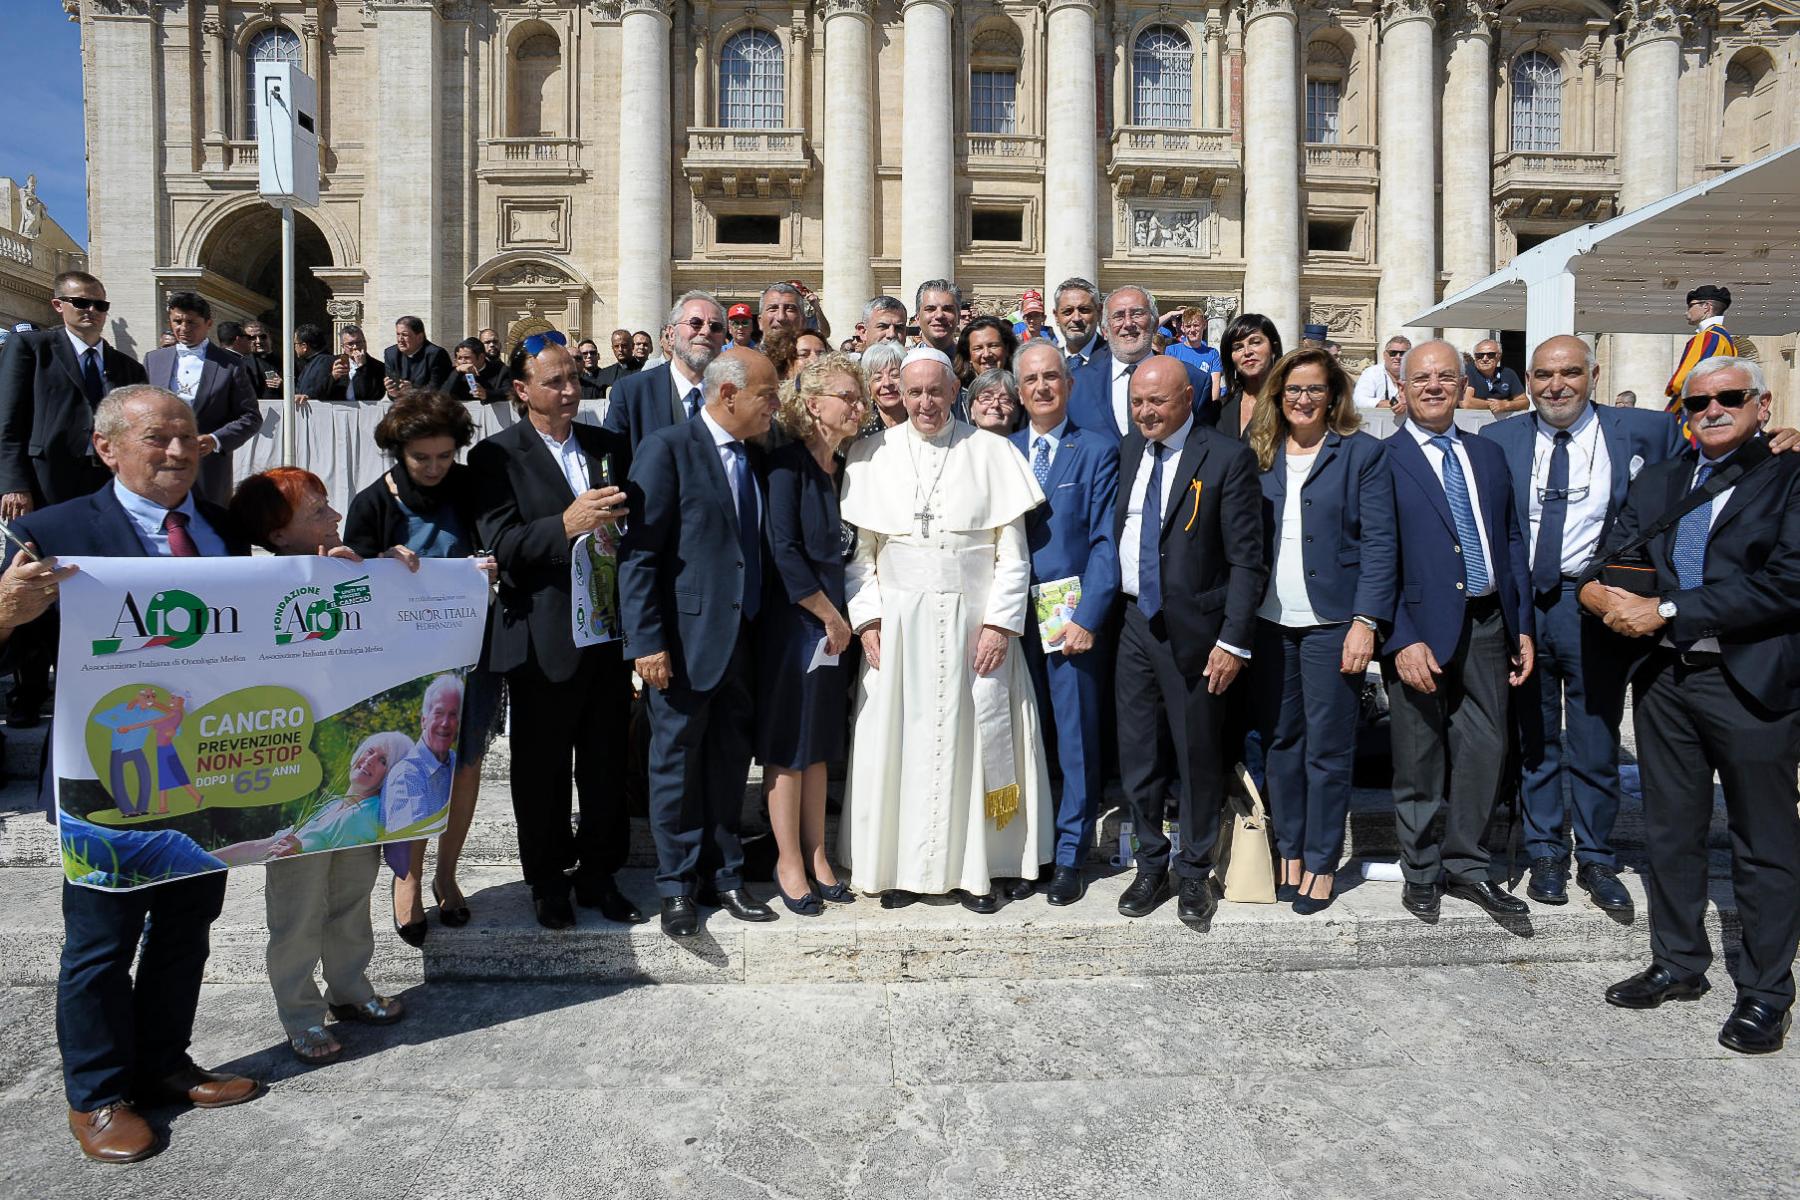 Group photo of AIOM and patient representatives with Pope Francis